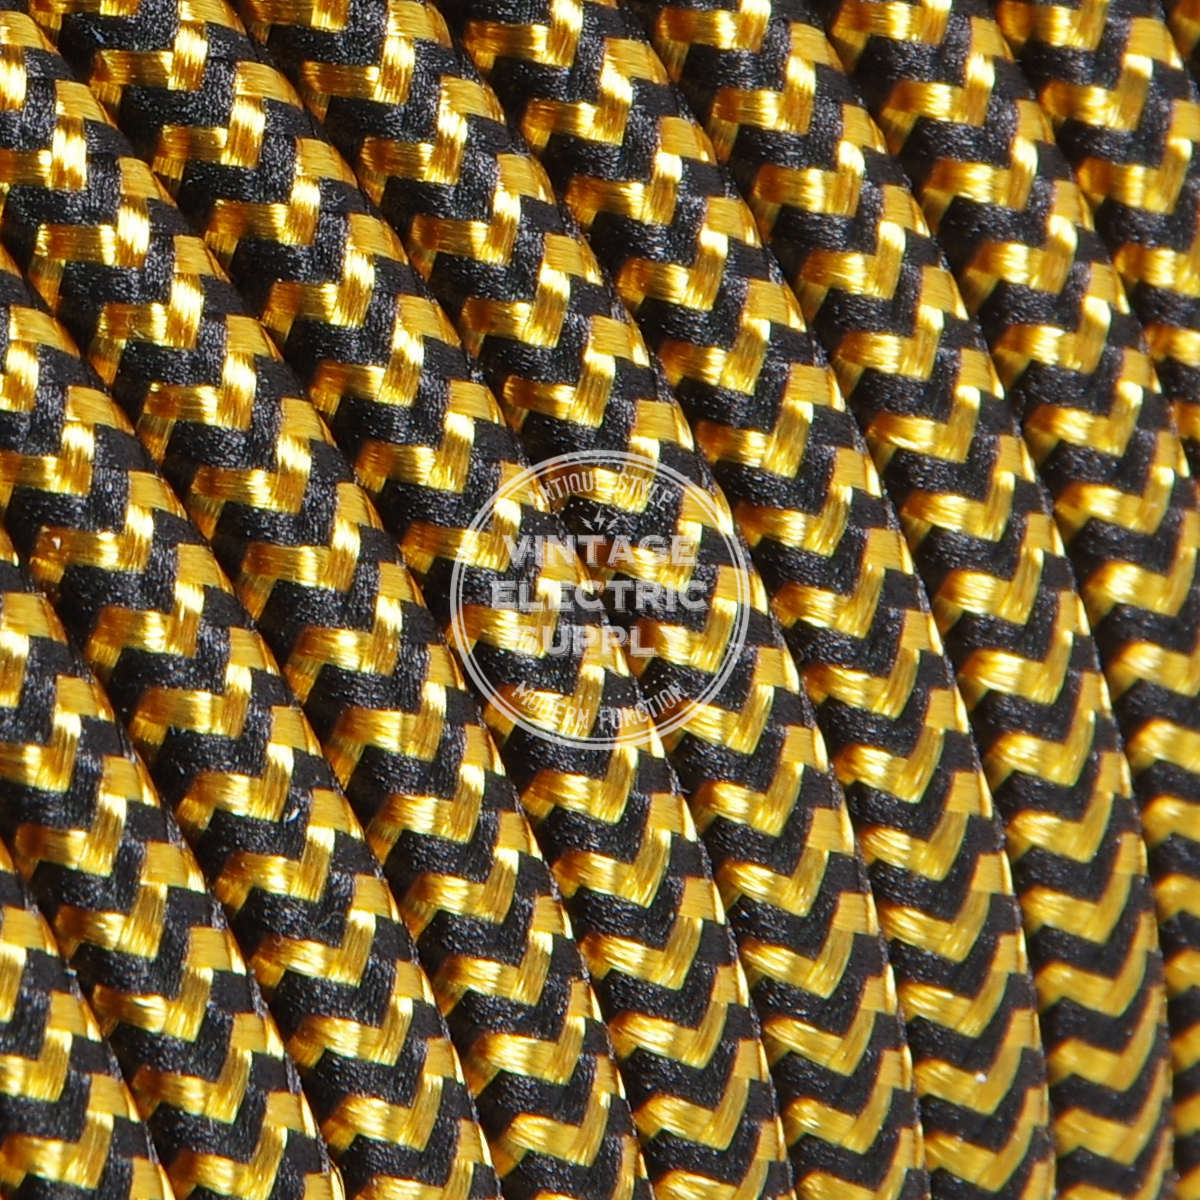 Copper & Black (UL) Cloth Covered Electrical Wire - Braided Rayon Fabric Wire